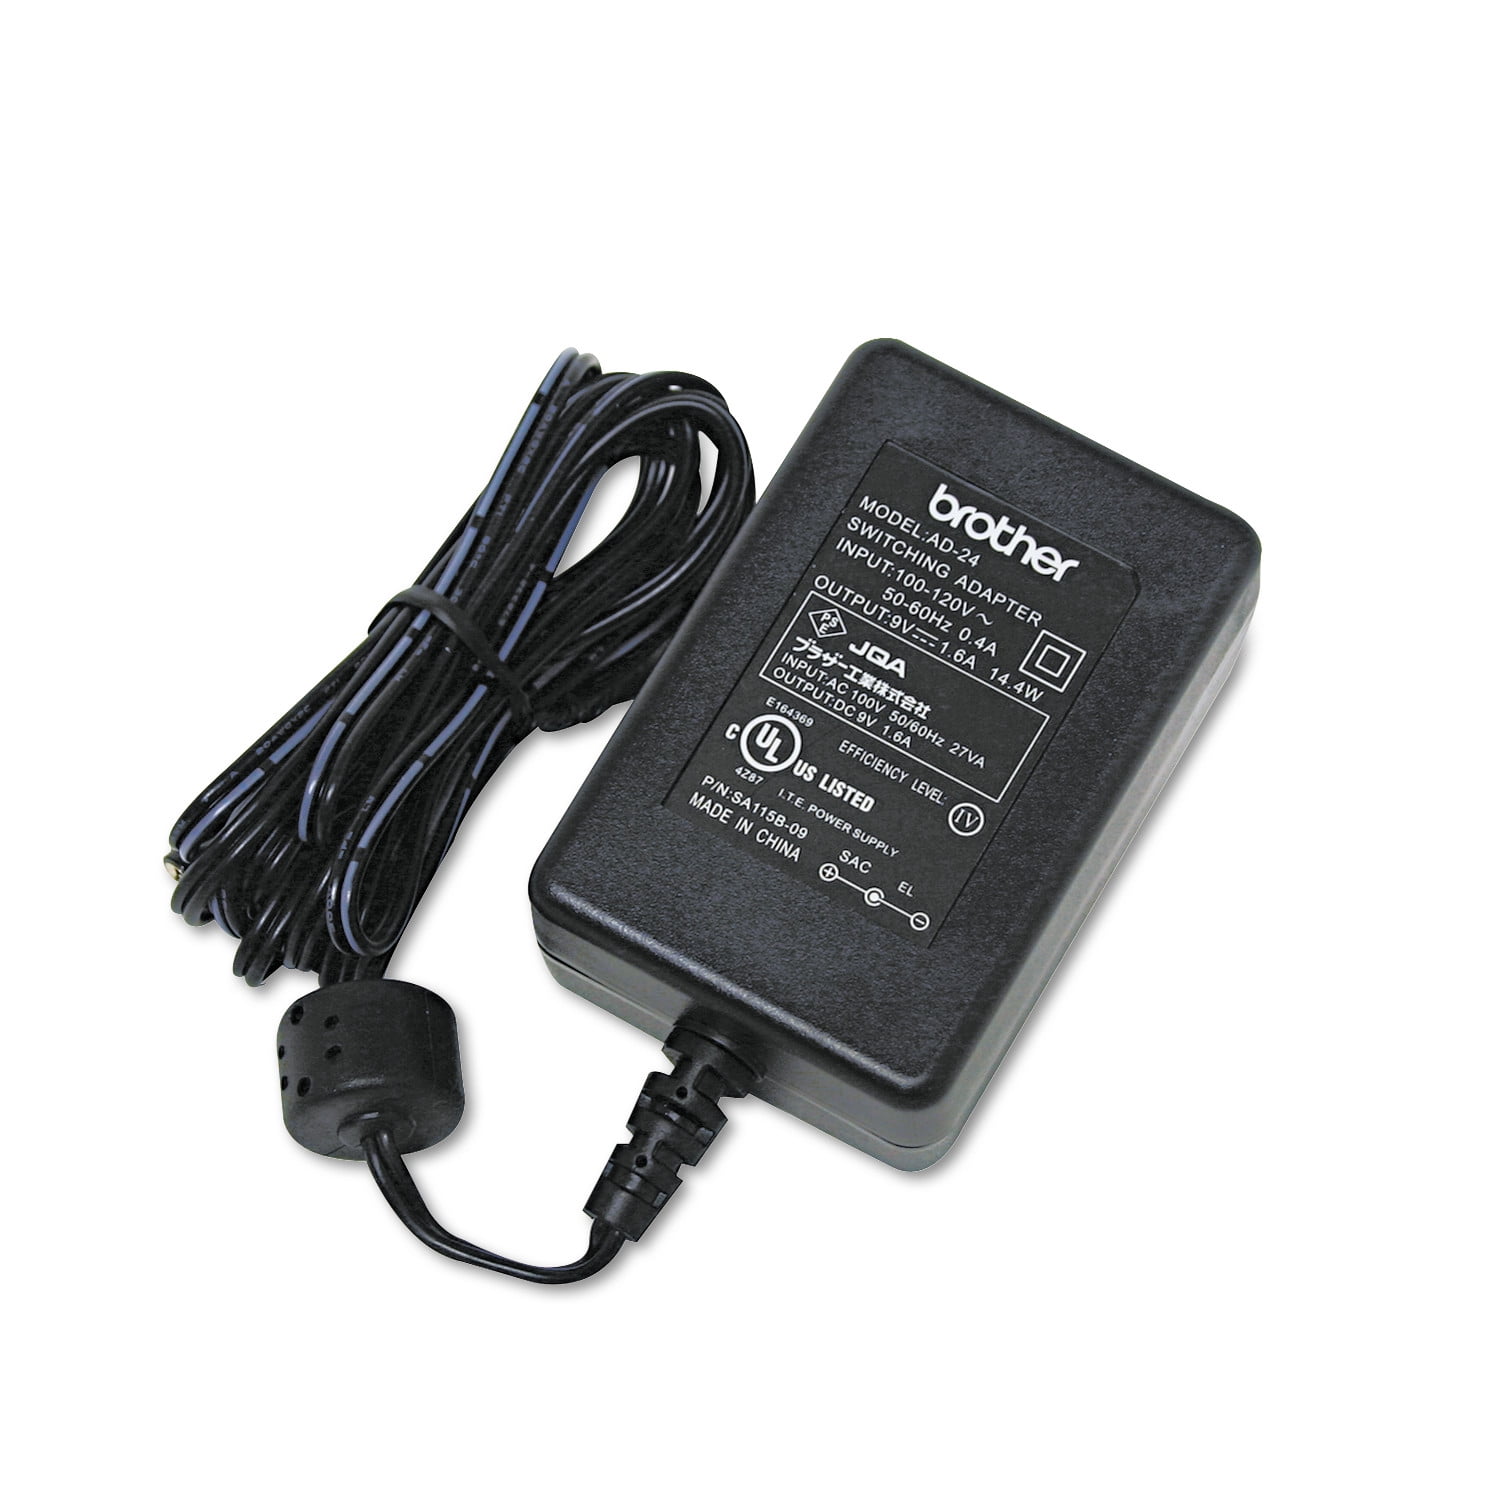 AC ADAPTER POWER CHARGER SUPPLY CORD Brother P-Touch PT-1010 PT-2300 Label 